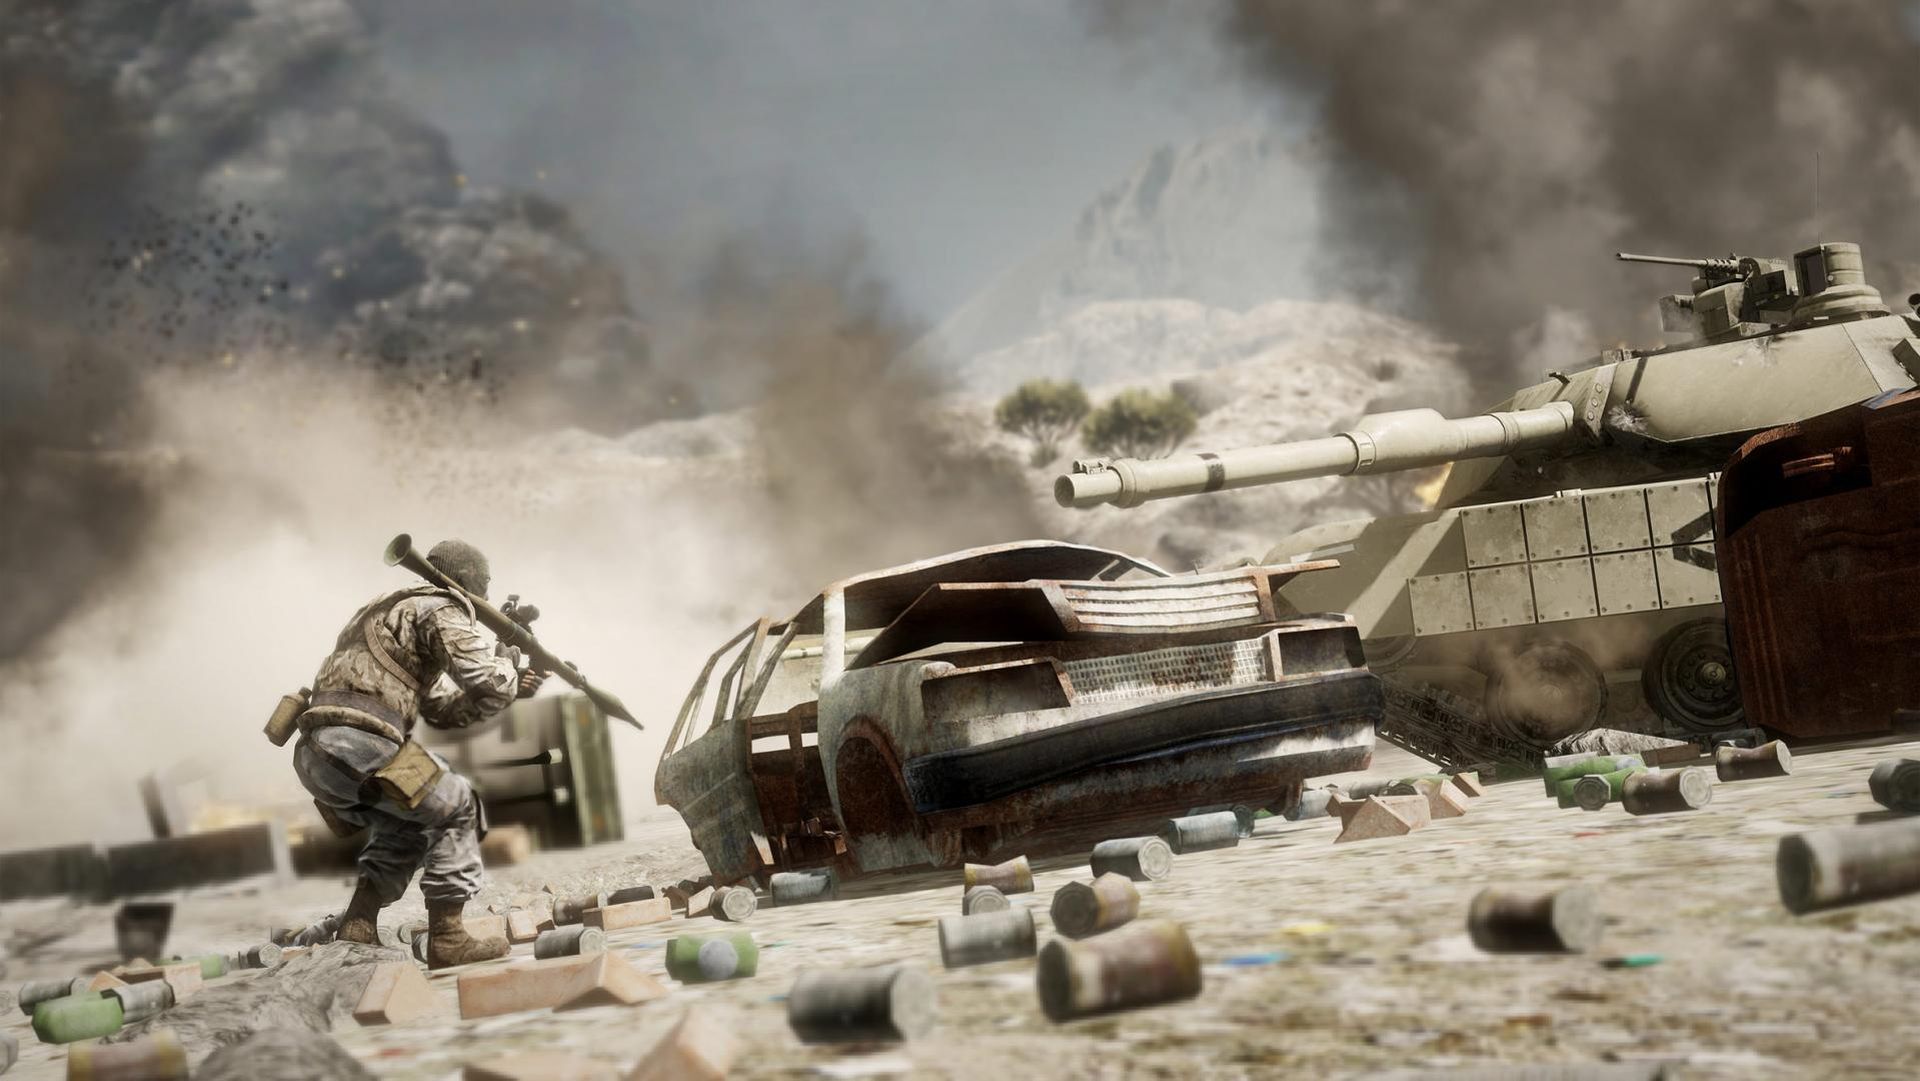 Today, we are covering Battlefield Bad Company 2 system requirements and will be answering some of the frequent questions asked about the game.